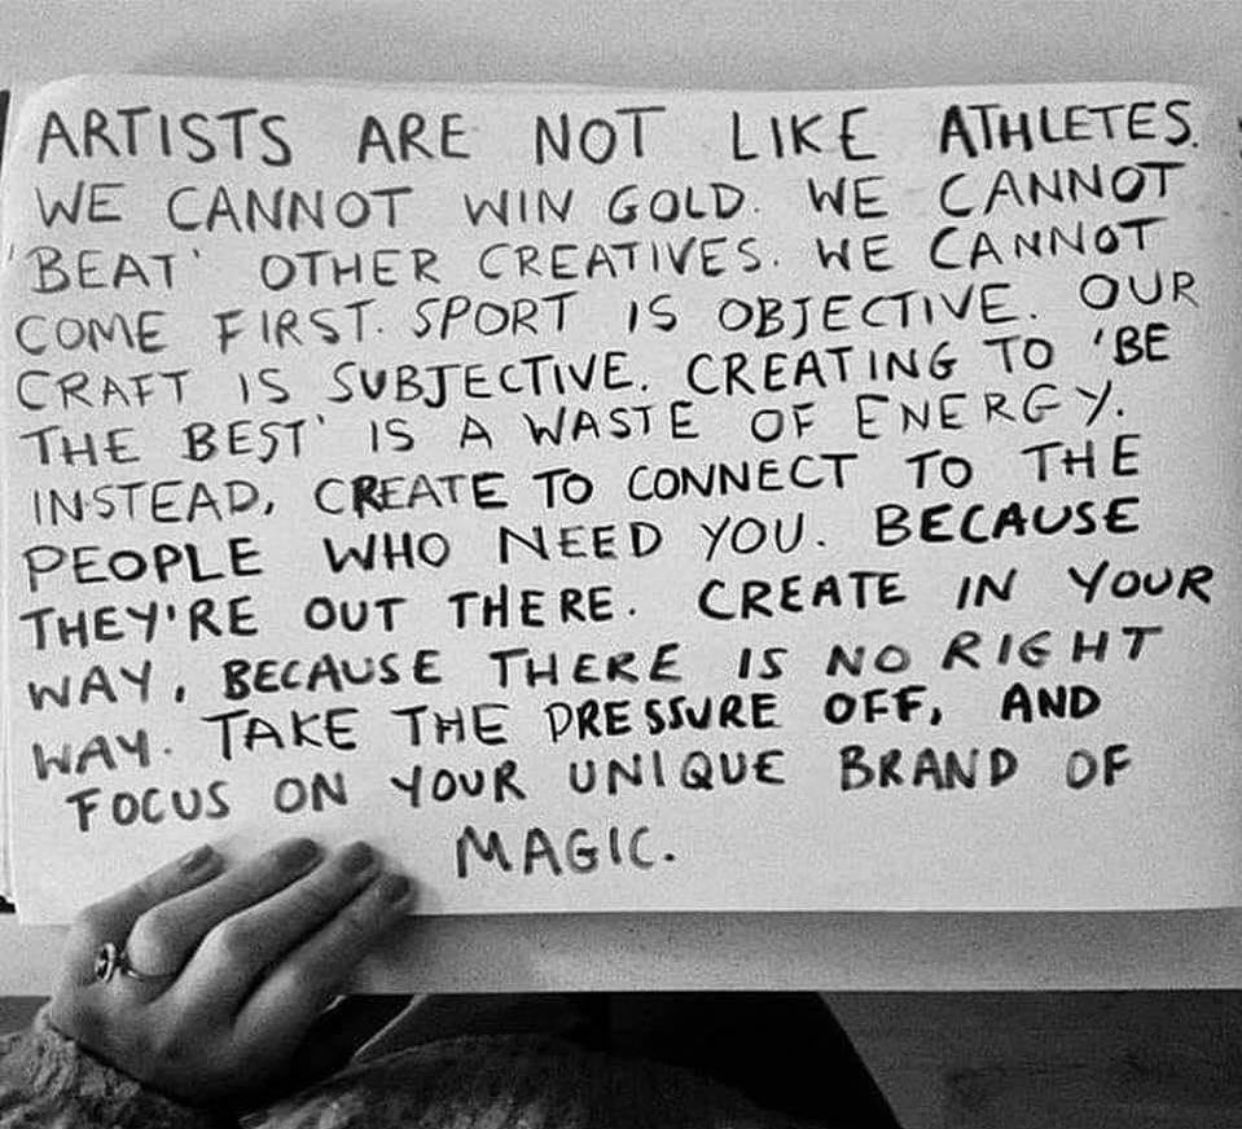 An image of text, reading "Artists are not like athletes. We cannot win gold. We cannot 'beat' other creatives. We cannot come first. Sport is objective. Our craft is subjective. Creating to be the best is a waste of energy. Instead, create to connect to the people who need you. Because they're out there. Create in your way, because there is no right way. Take the pressure off, and focus on your unique brand of magic.